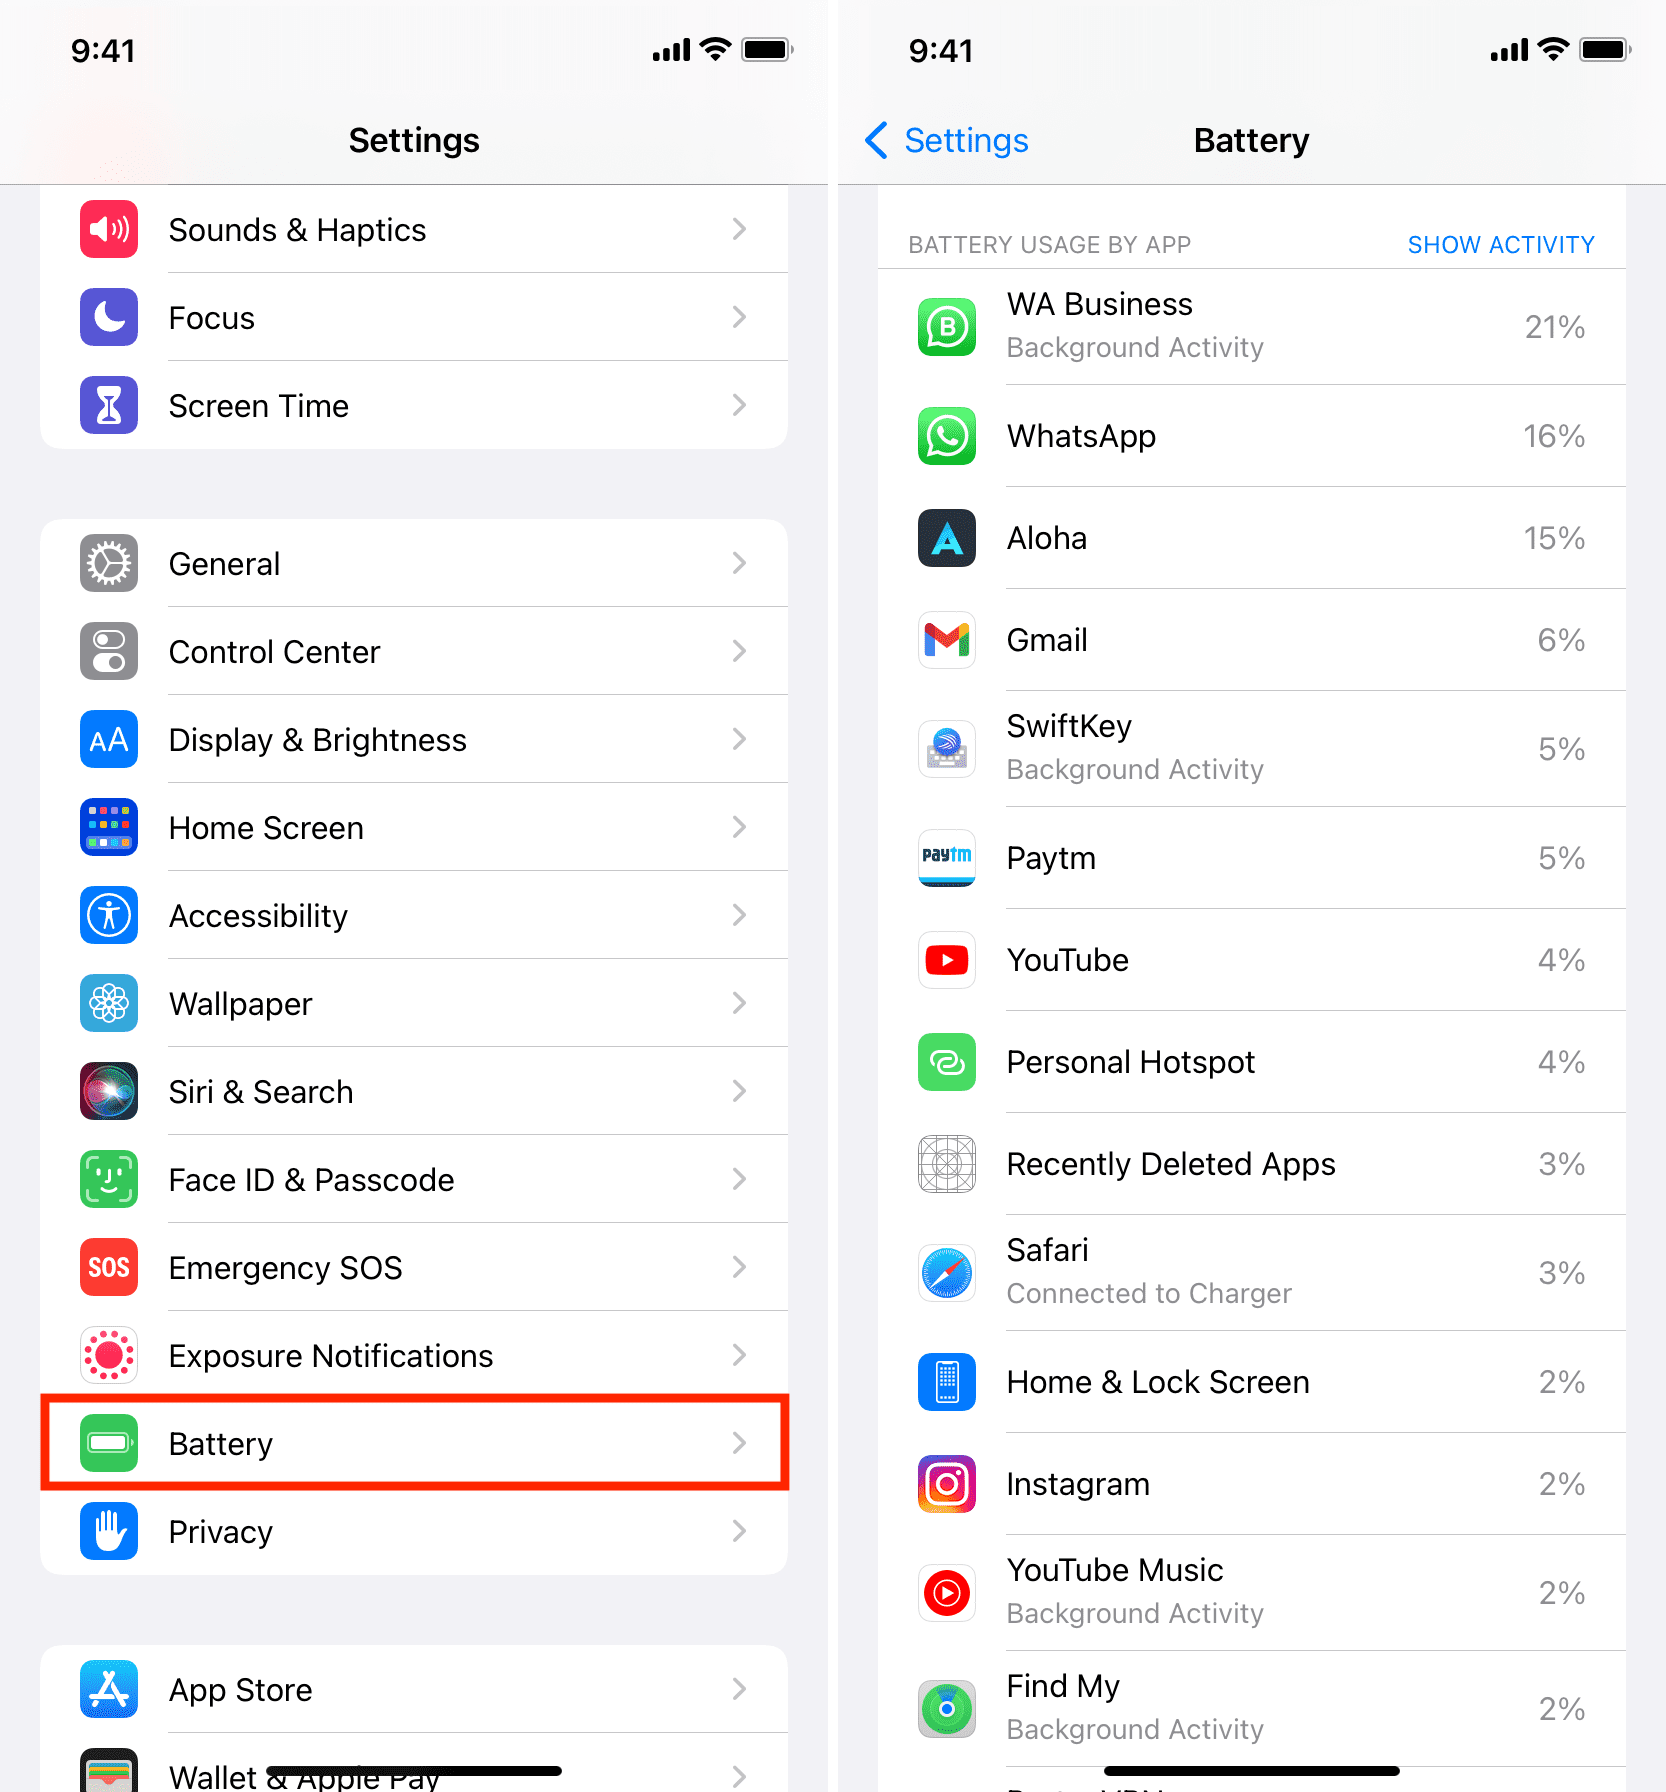 See battery percentage used by iPhone apps